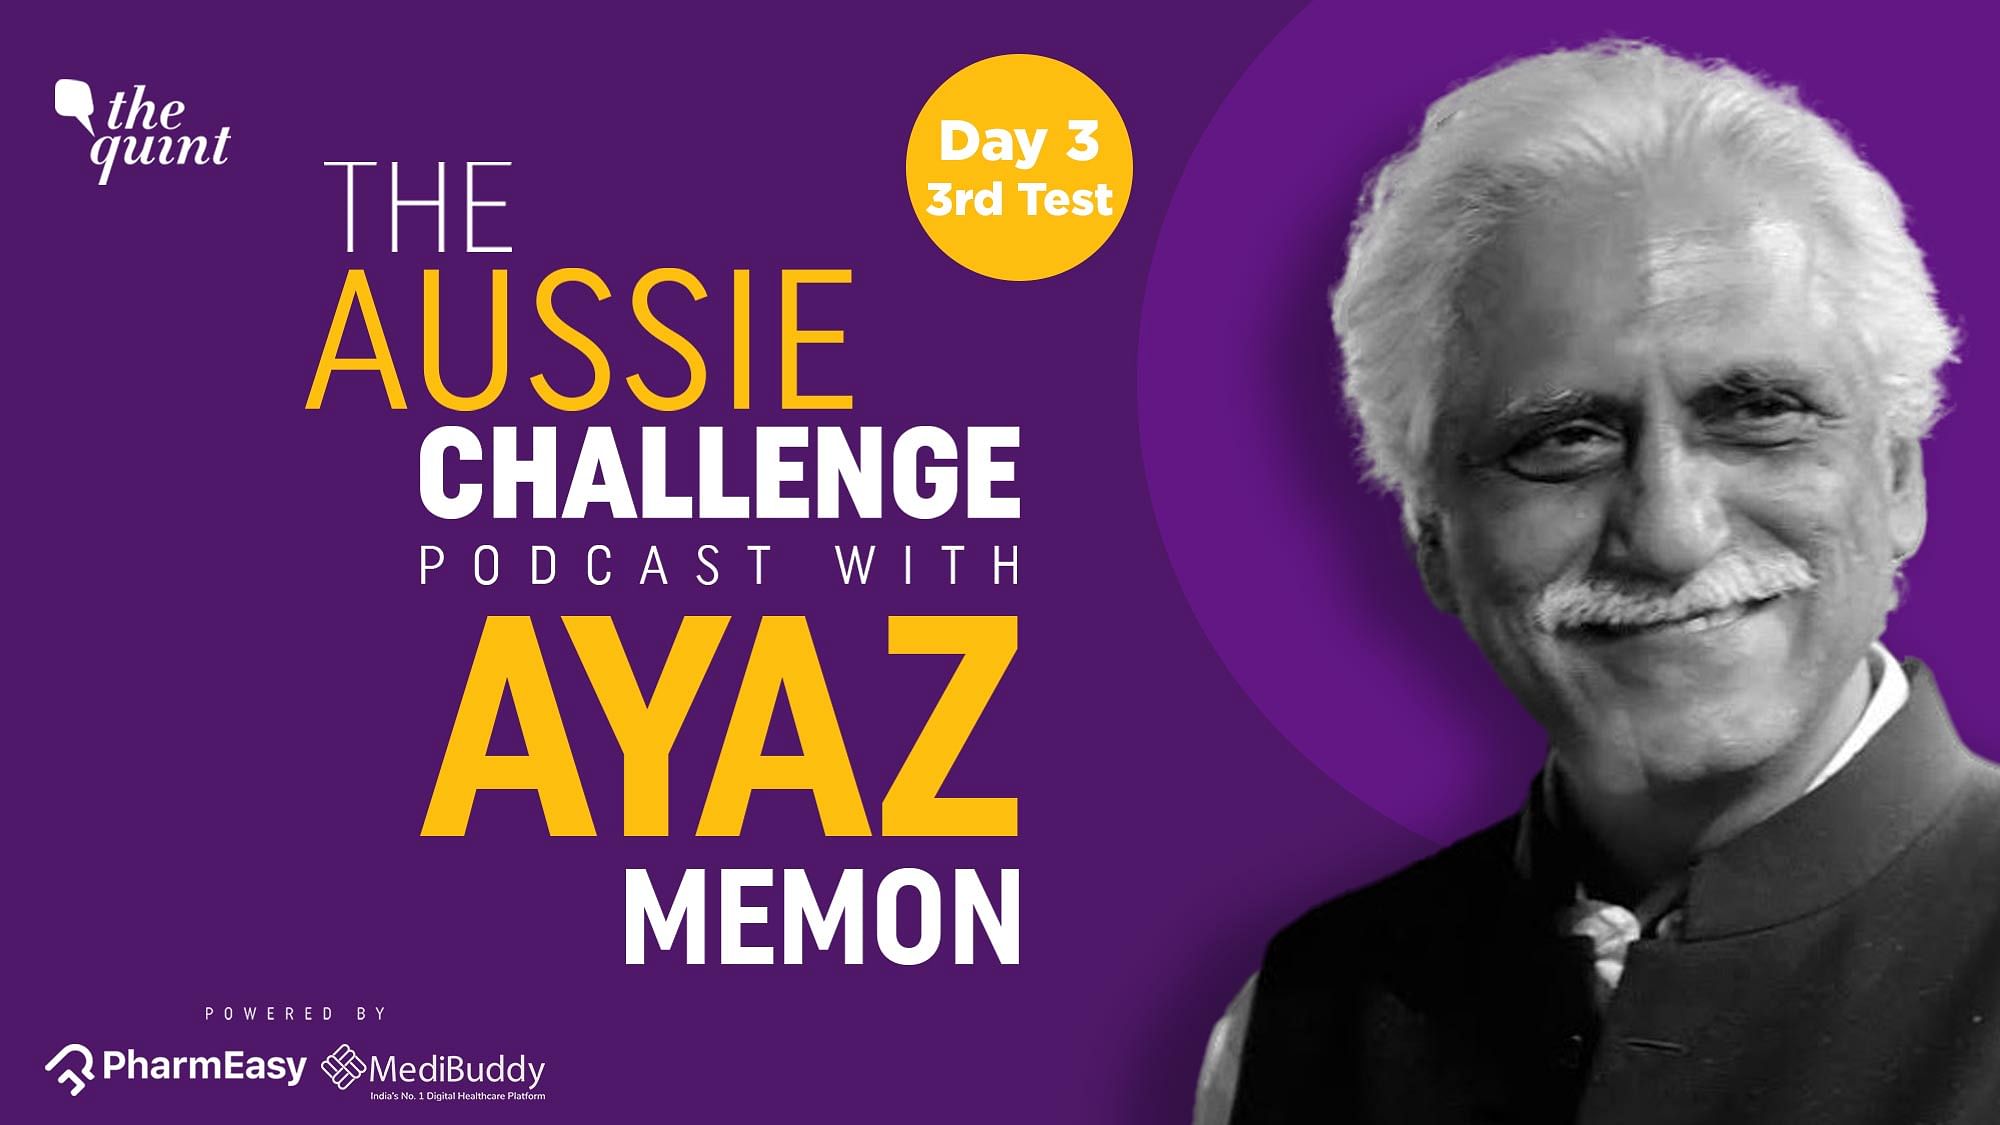 On this episode of The Aussie Challenge podcast, Ayaz Memon discusses Day 3 of the SCG Test.